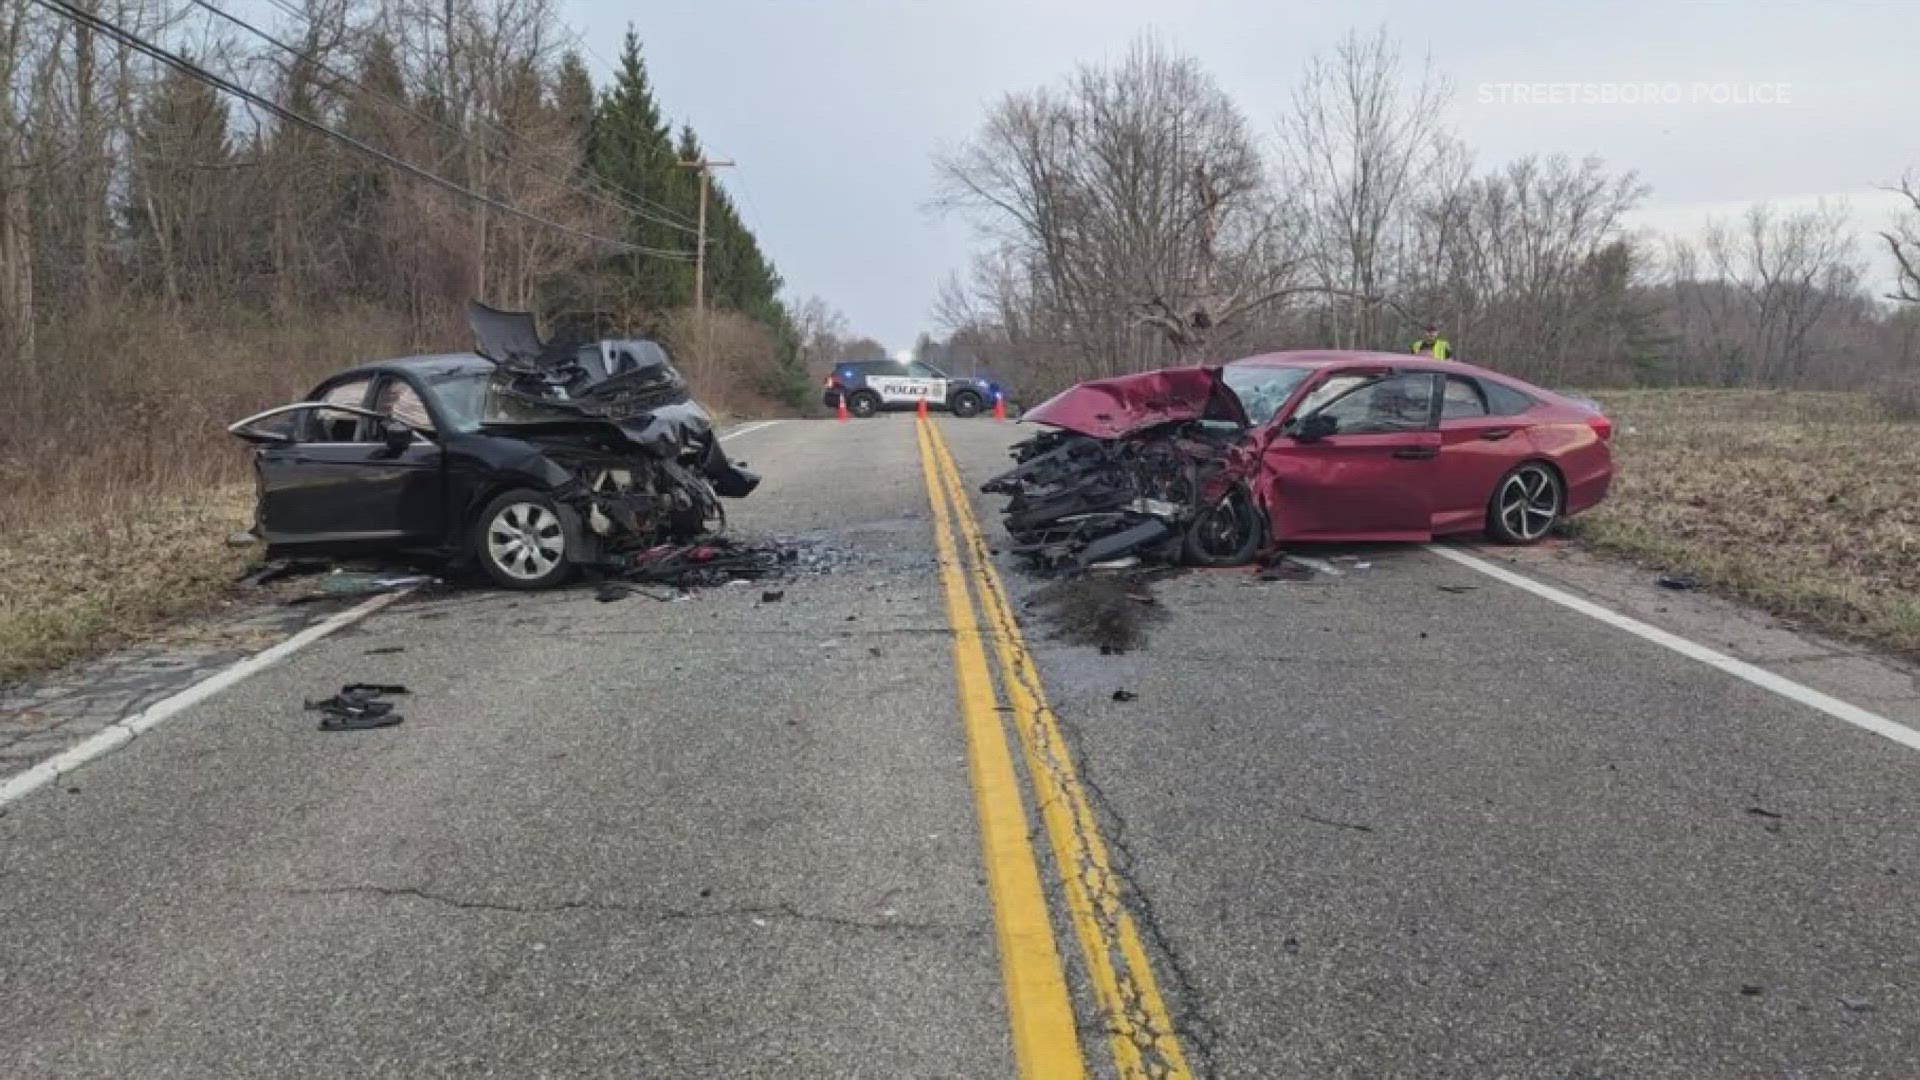 The crash happened on State Route 43 near Kennedy Road. Police have determined that the at-fault driver illegally passed slower-moving cars on a double yellow line.